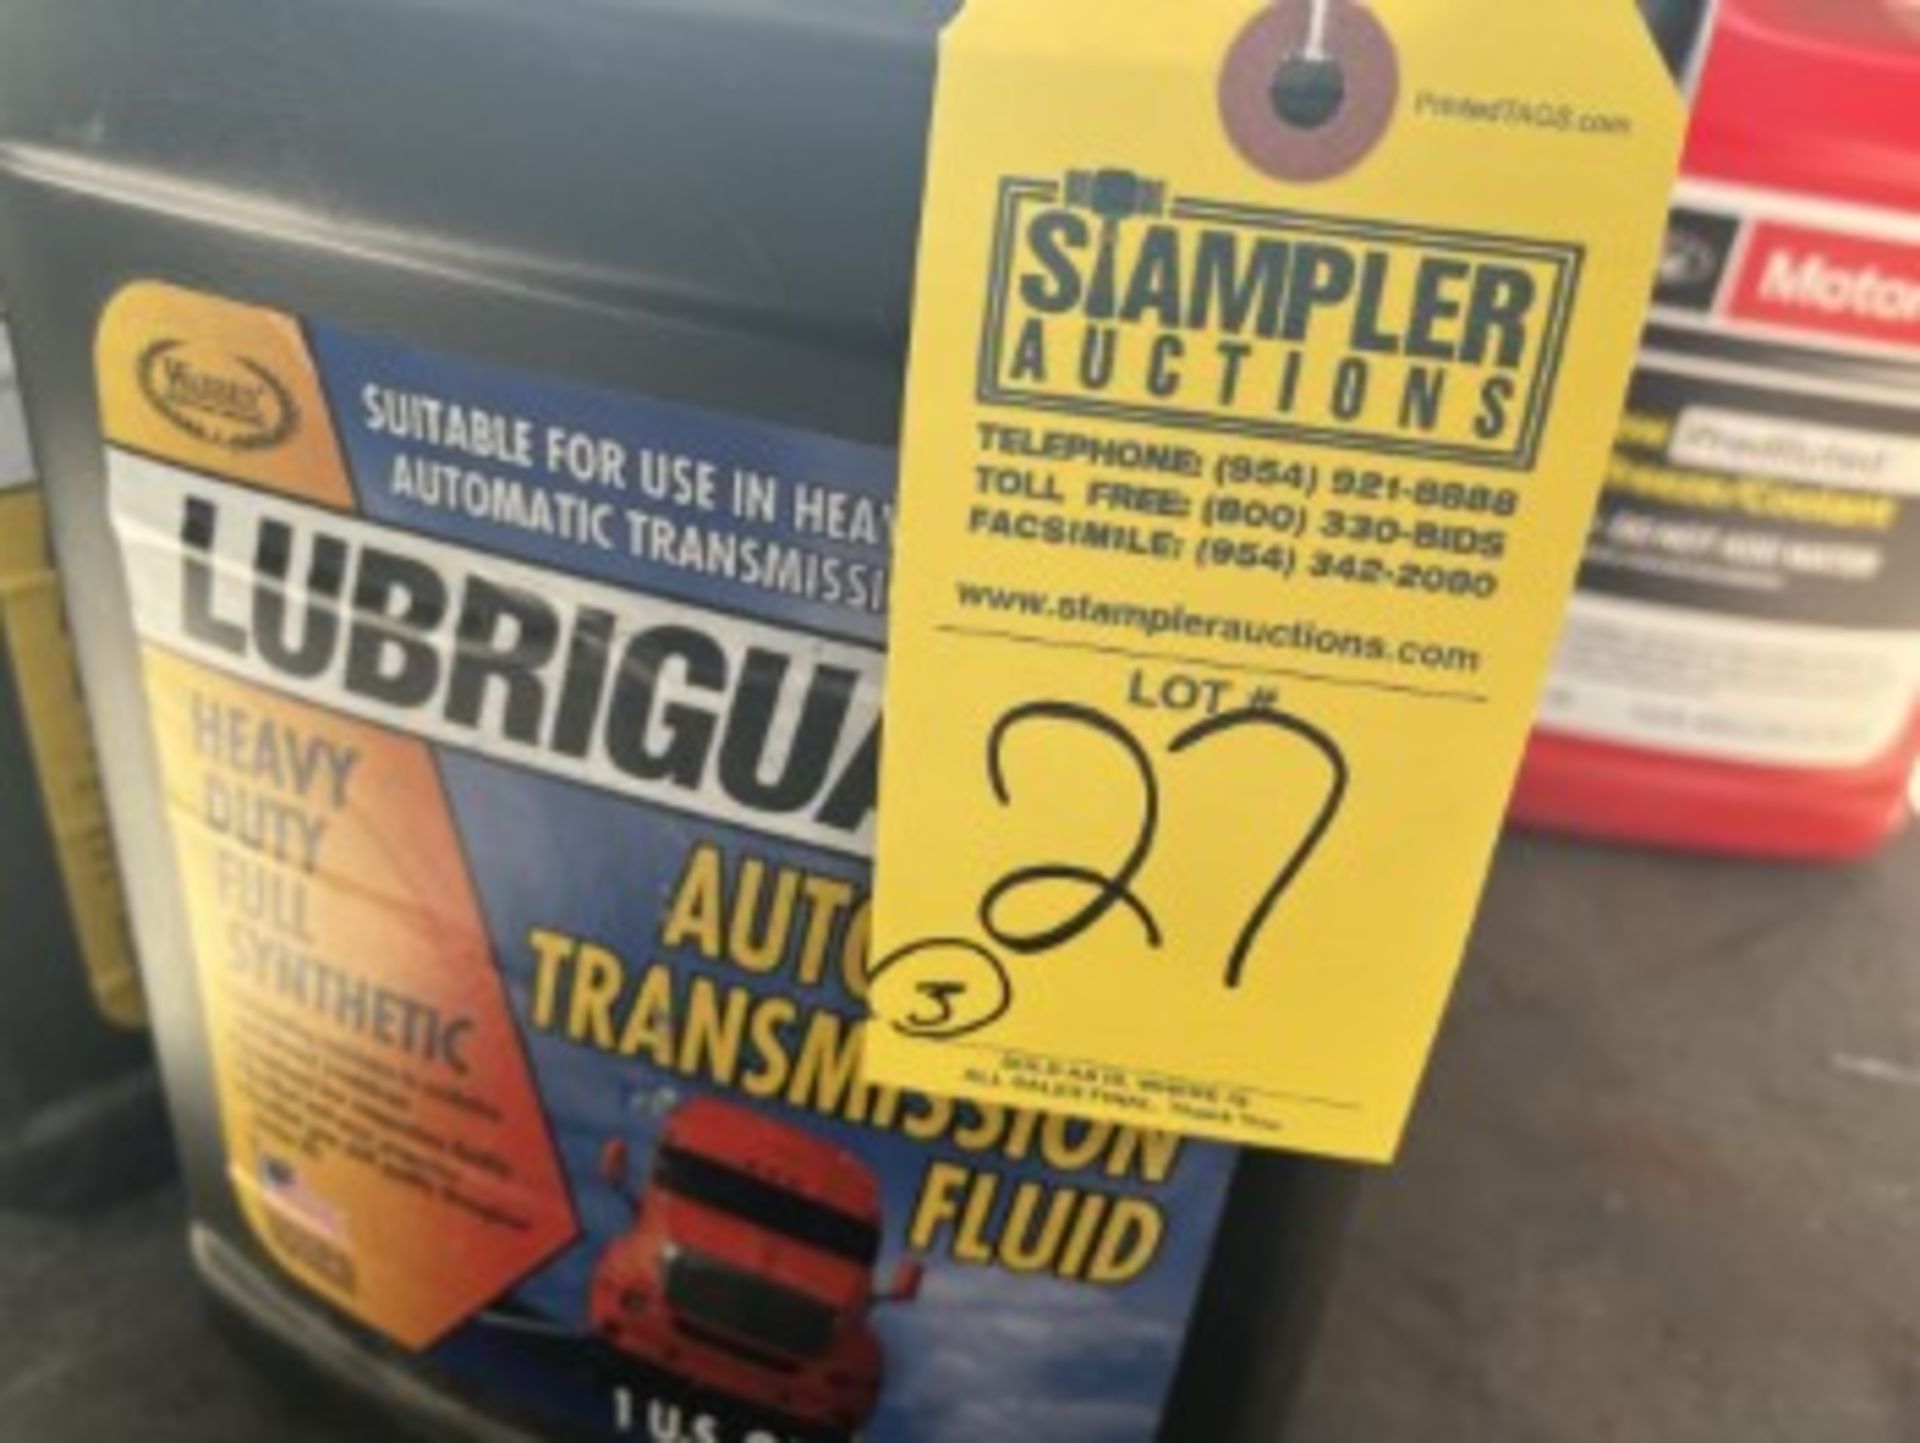 LUBRIGUARD HEAVY DUTY FULL SYNTHETIC AUTO TRANSMISSION FLUID - Image 2 of 2